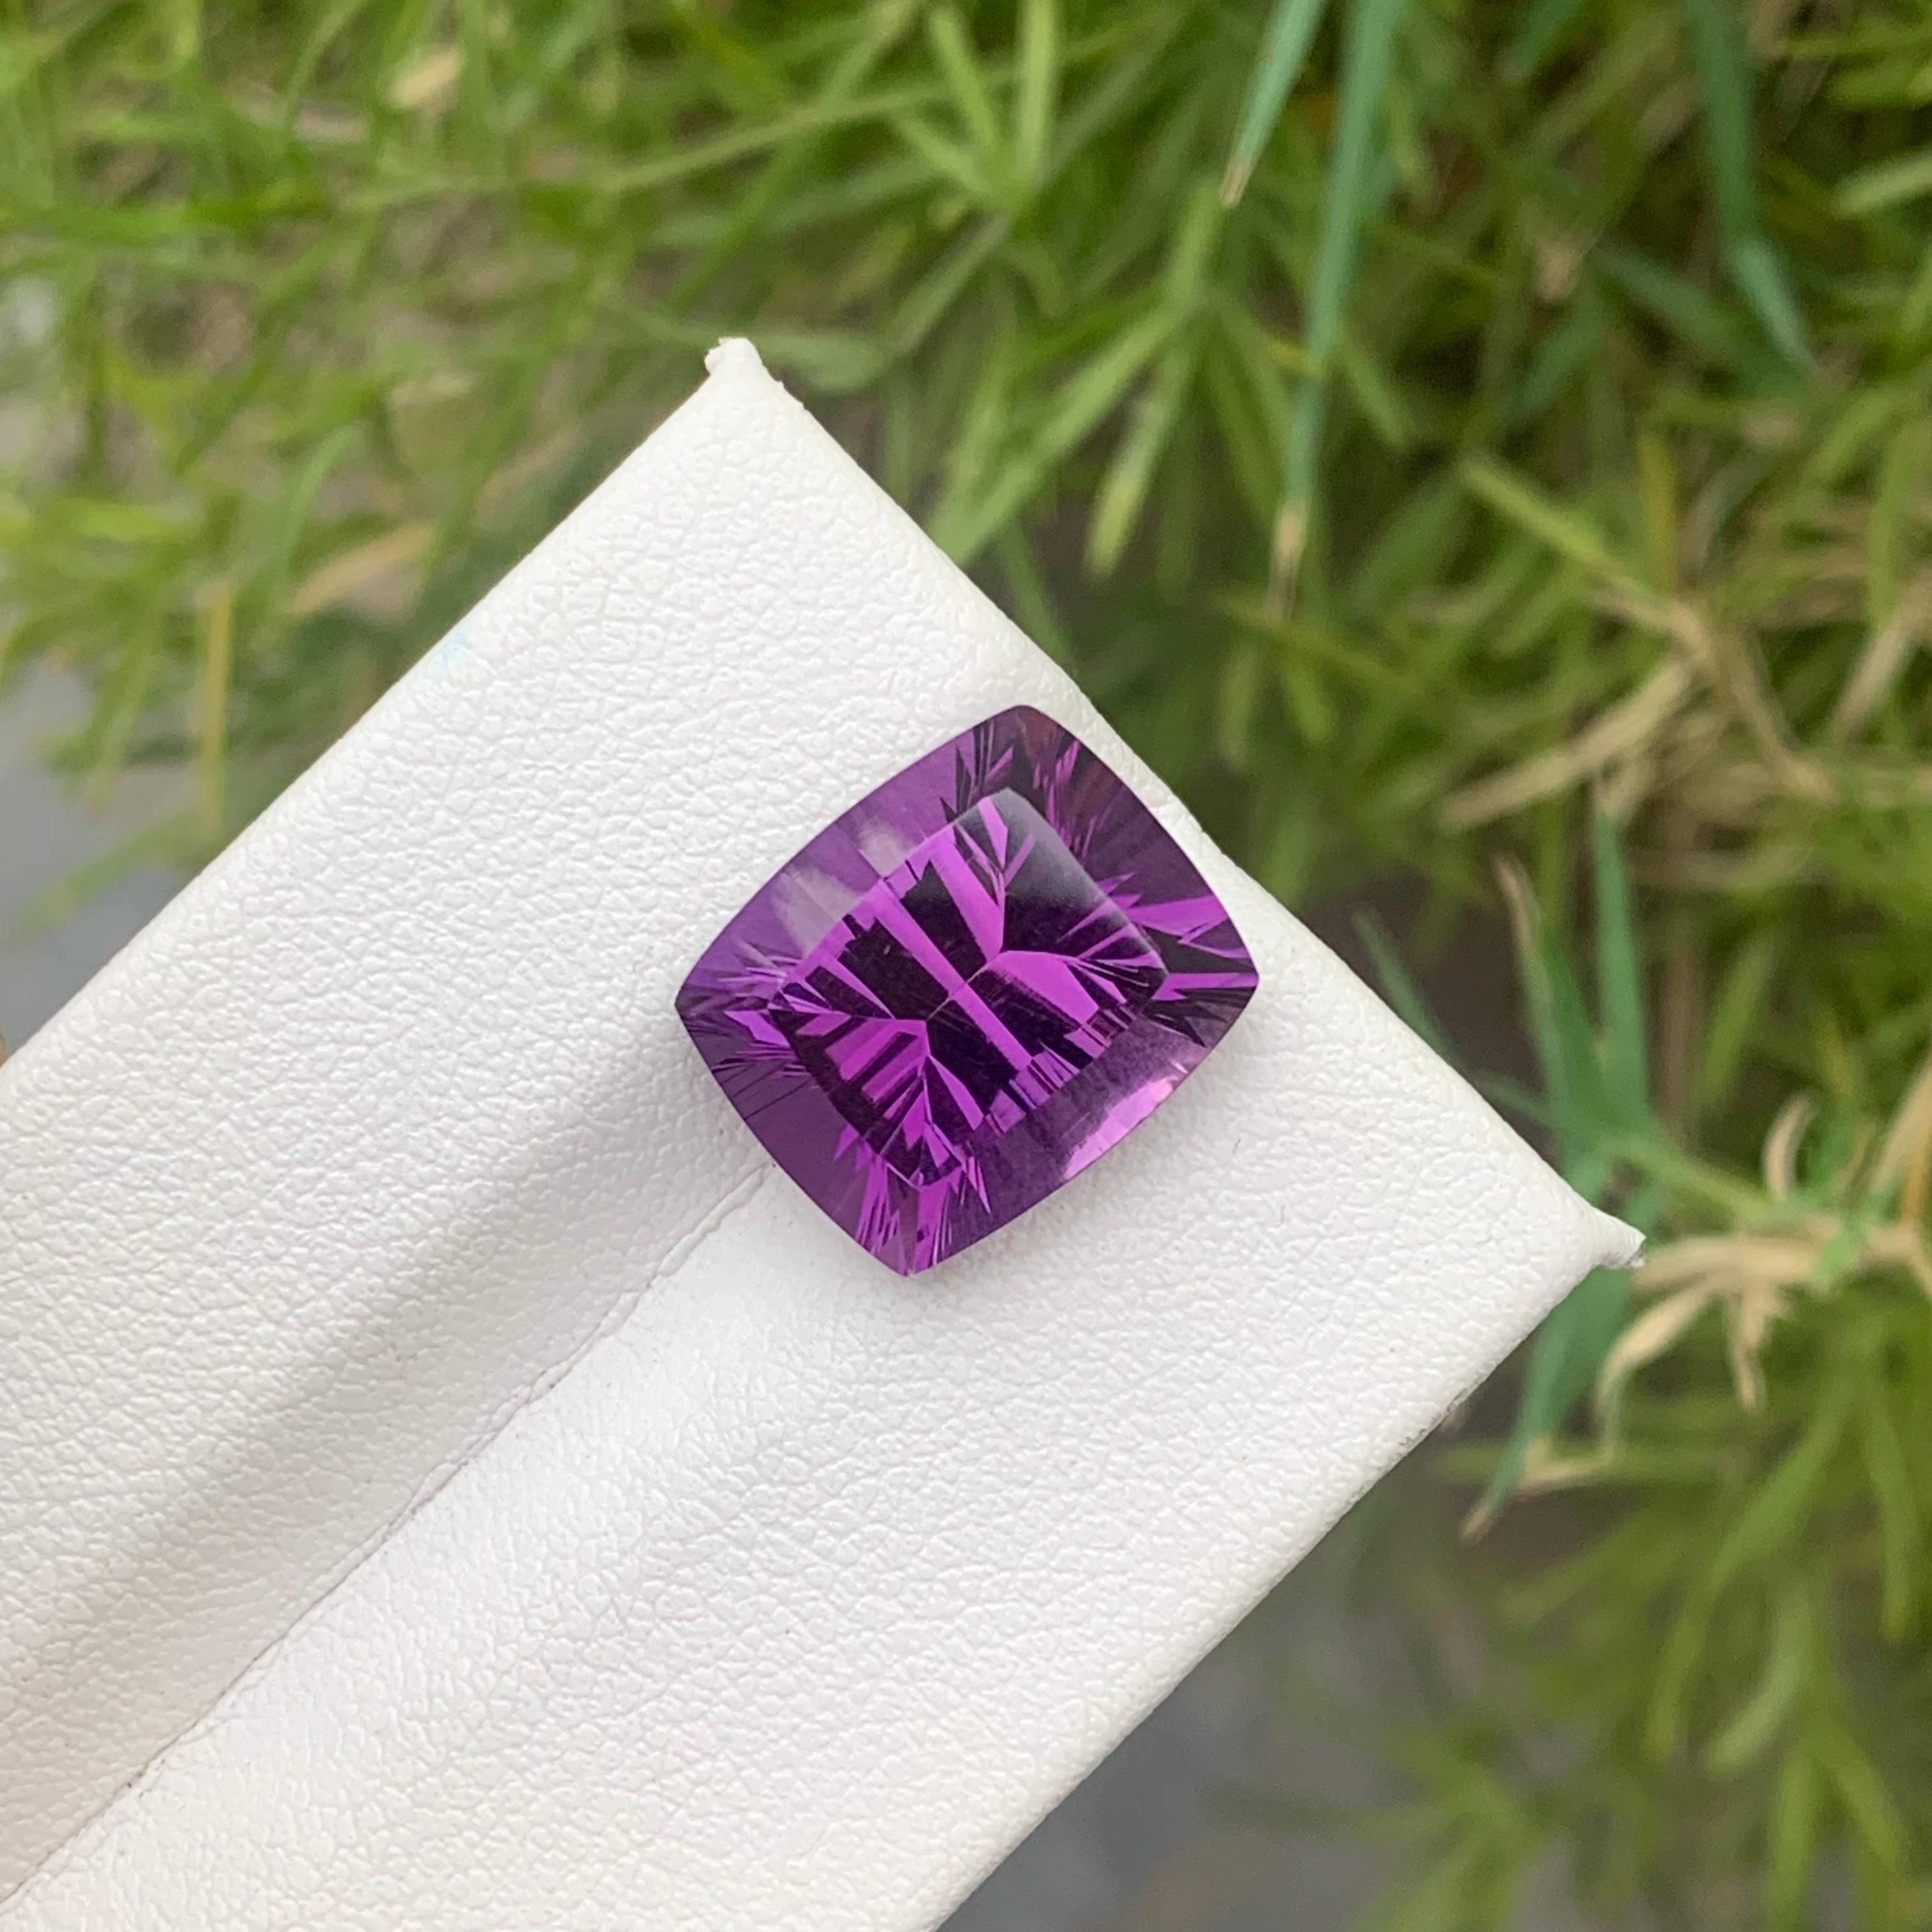 Arts and Crafts 7.45 Carat Natural Loose Purple Amethyst Laser Cut Gemstone from, Brazil For Sale